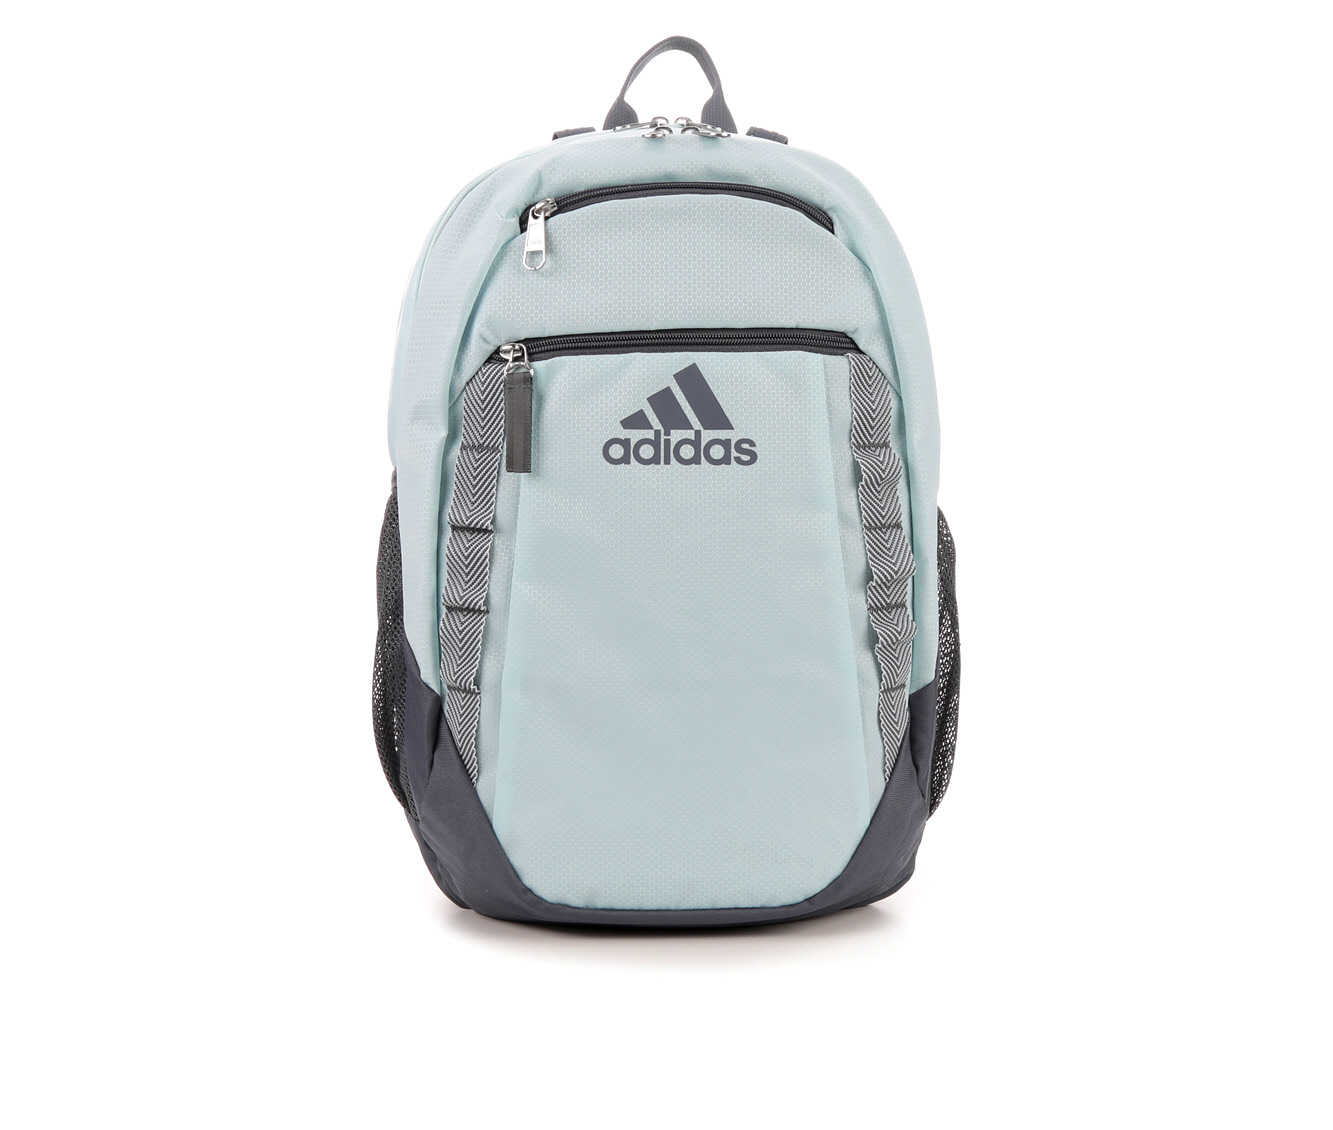 Adidas Backpacks & Lunch Boxes, Book Bags | Shoe Carnival